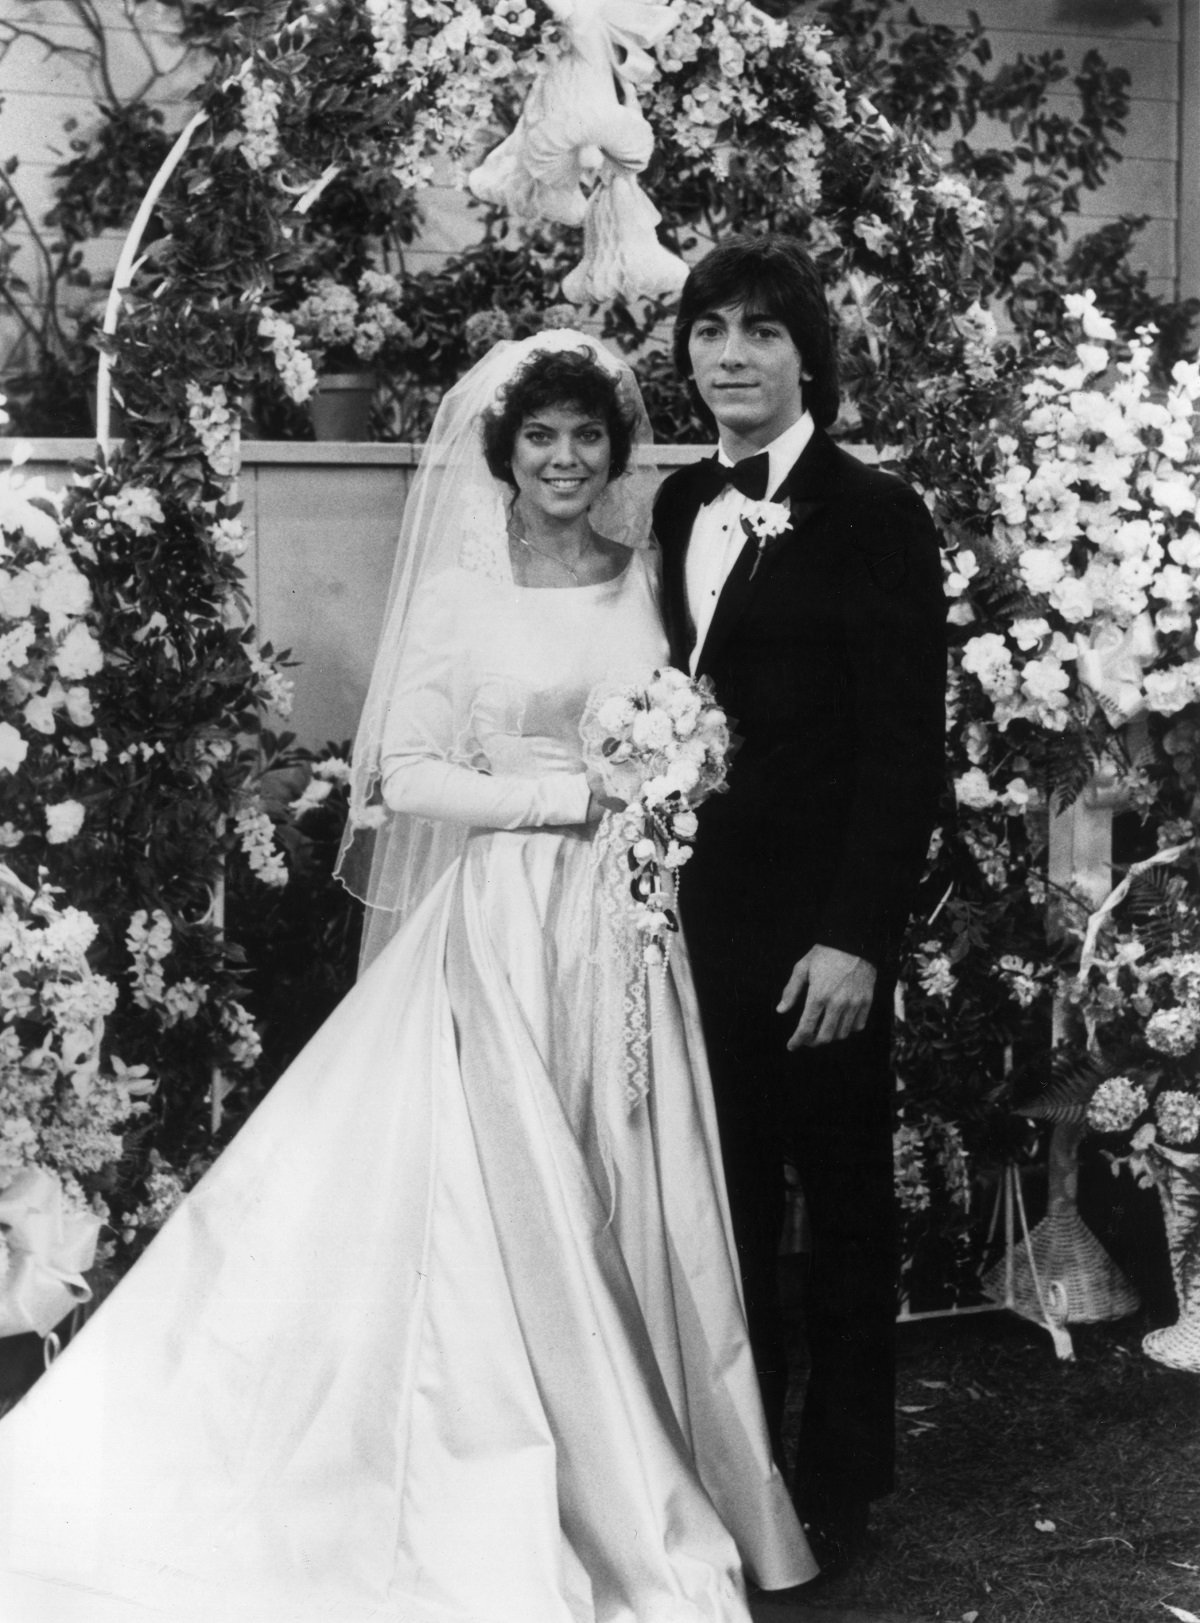 Erin Moran and Scott Baio in "Happy Days" in 1984 | Source: Getty Images